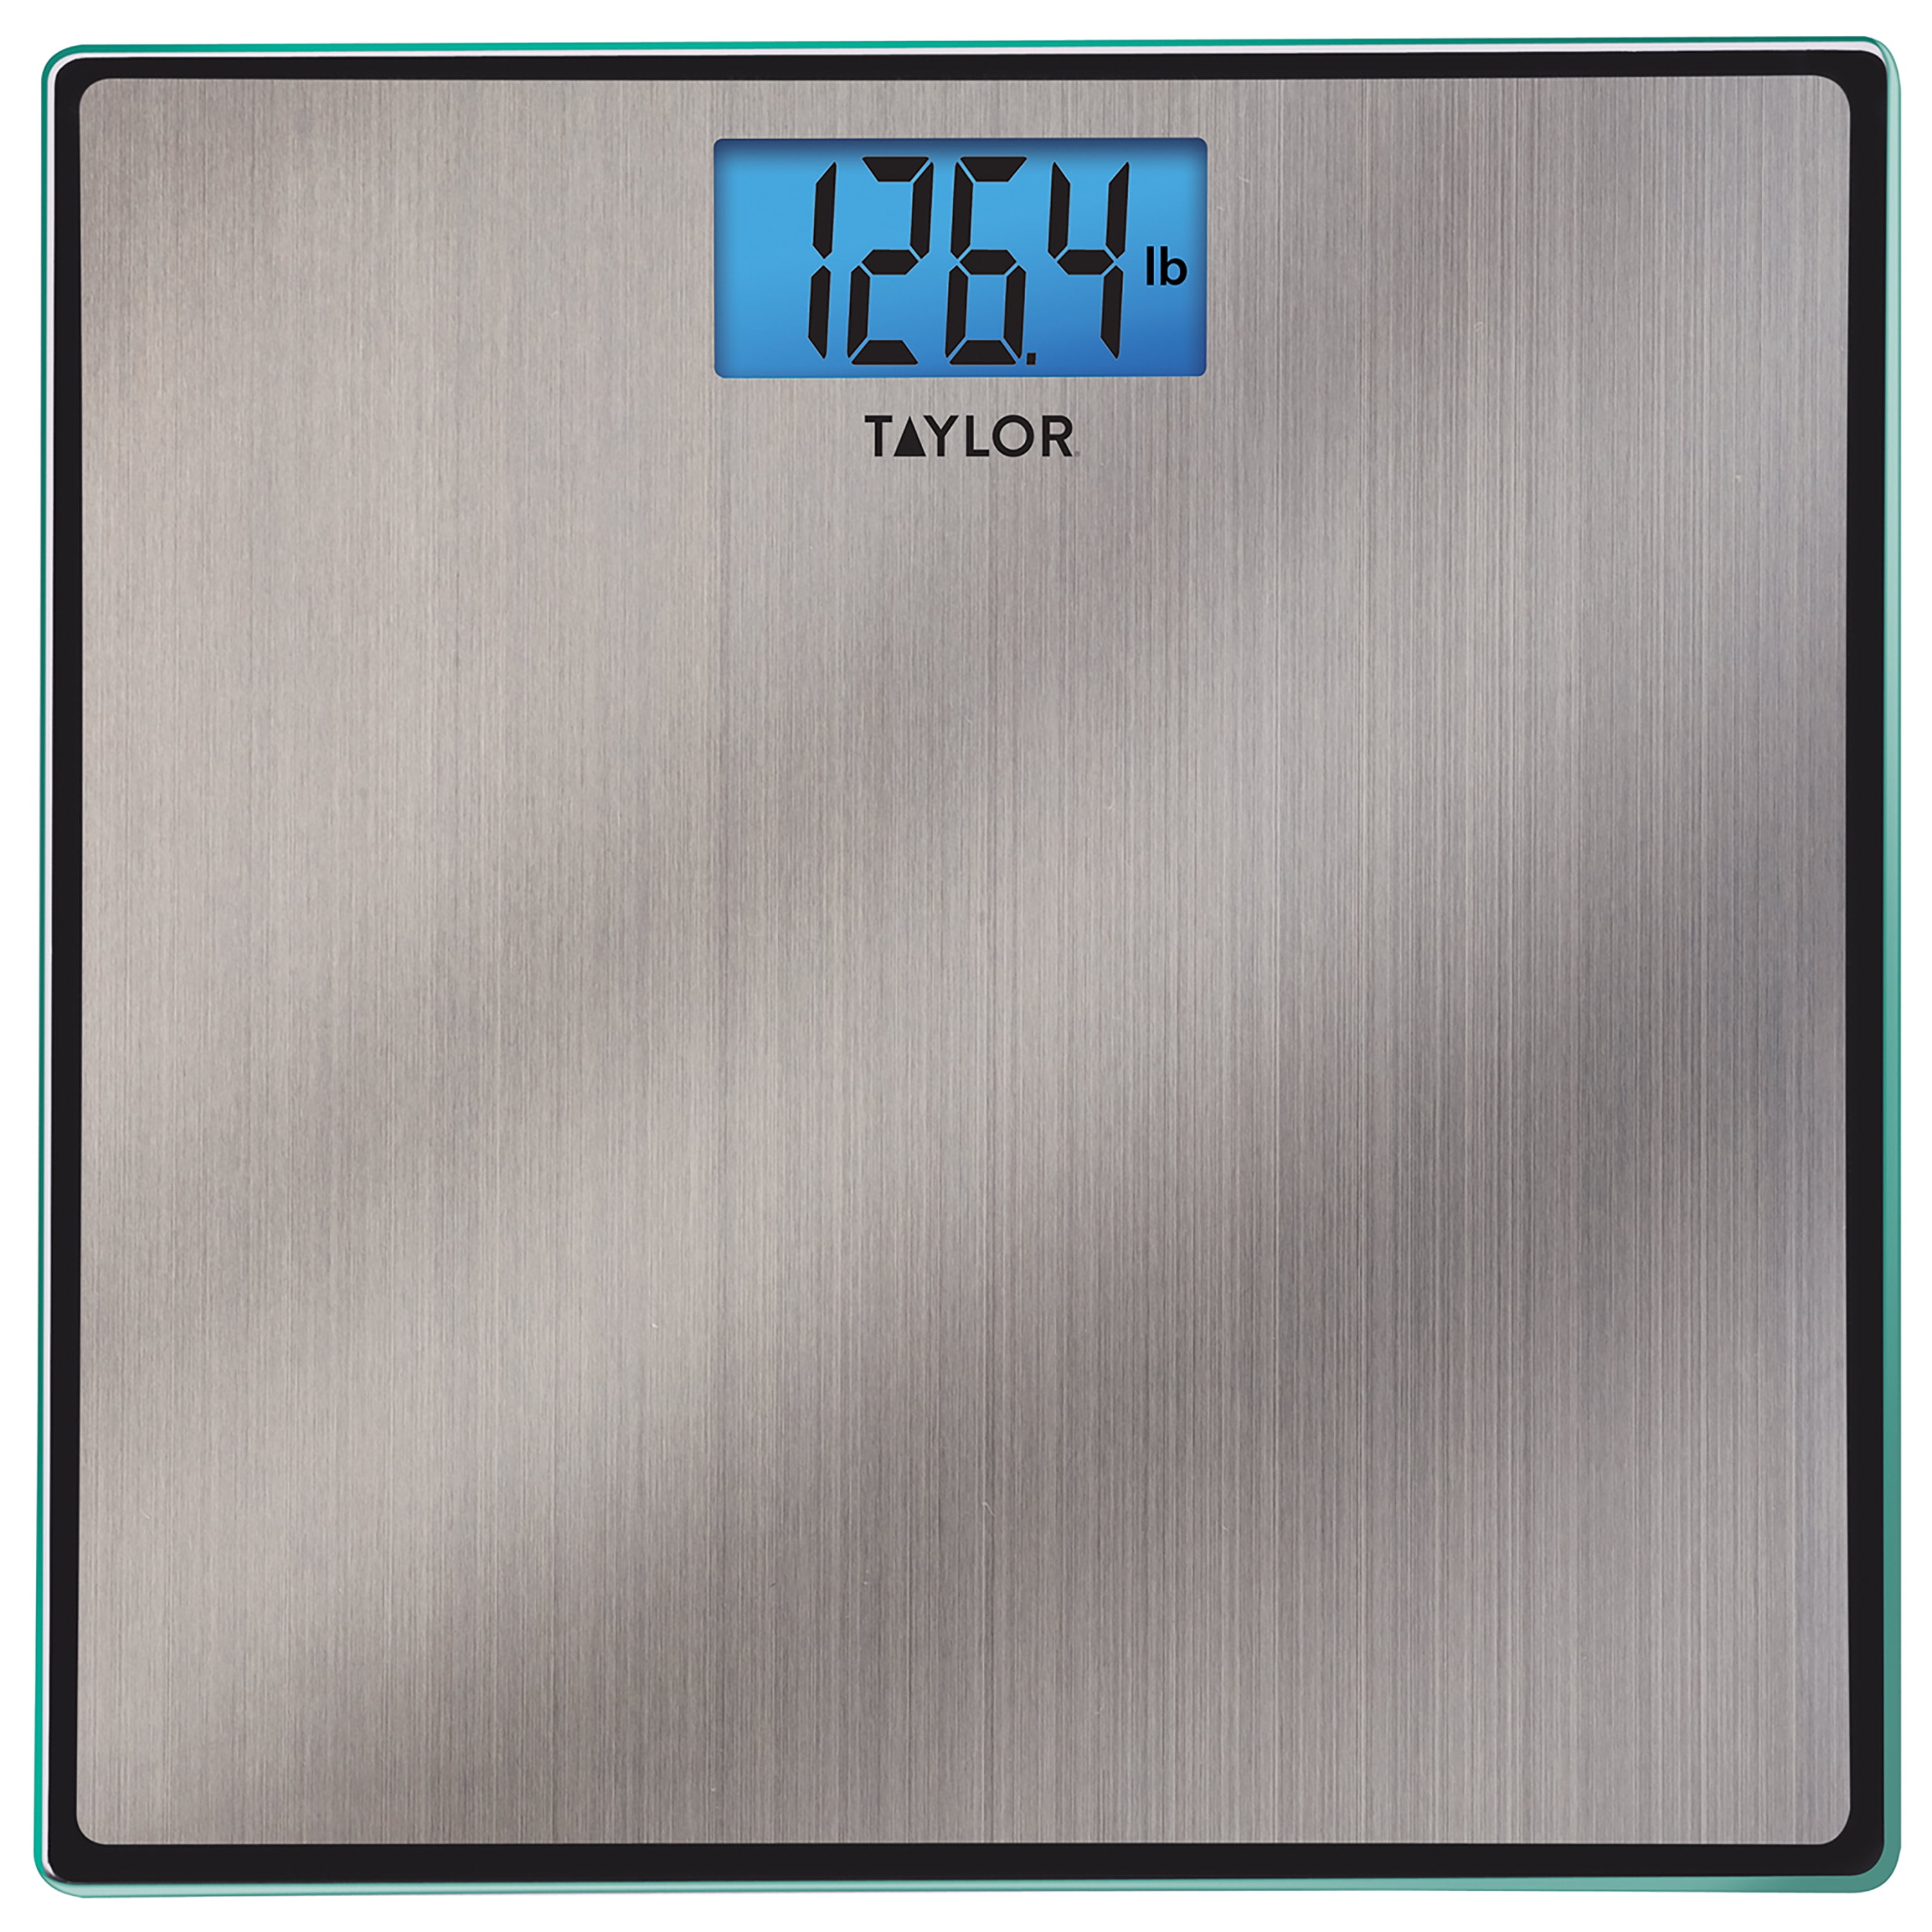 Digital Scale for Body Weight, Step-On Technology, High Capacity - 400 lbs.  Large Display, 1 Pack - Ralphs